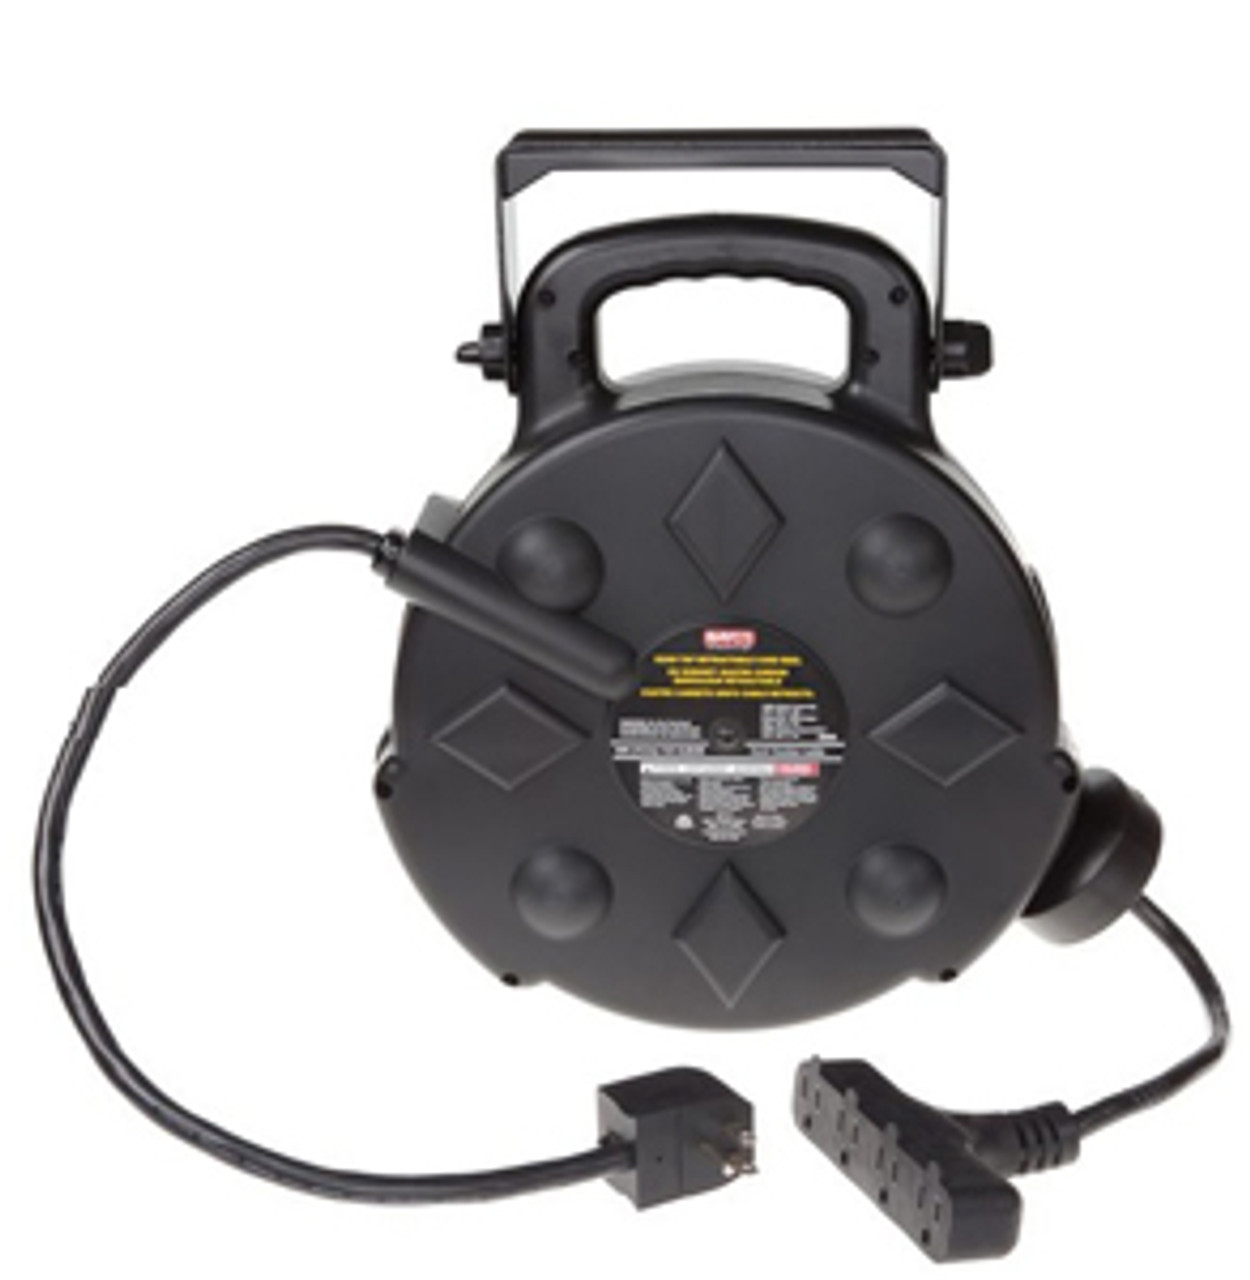 BYSL-8906 50' All Weather Extension Cord Reel - Wise Auto Tools LLC